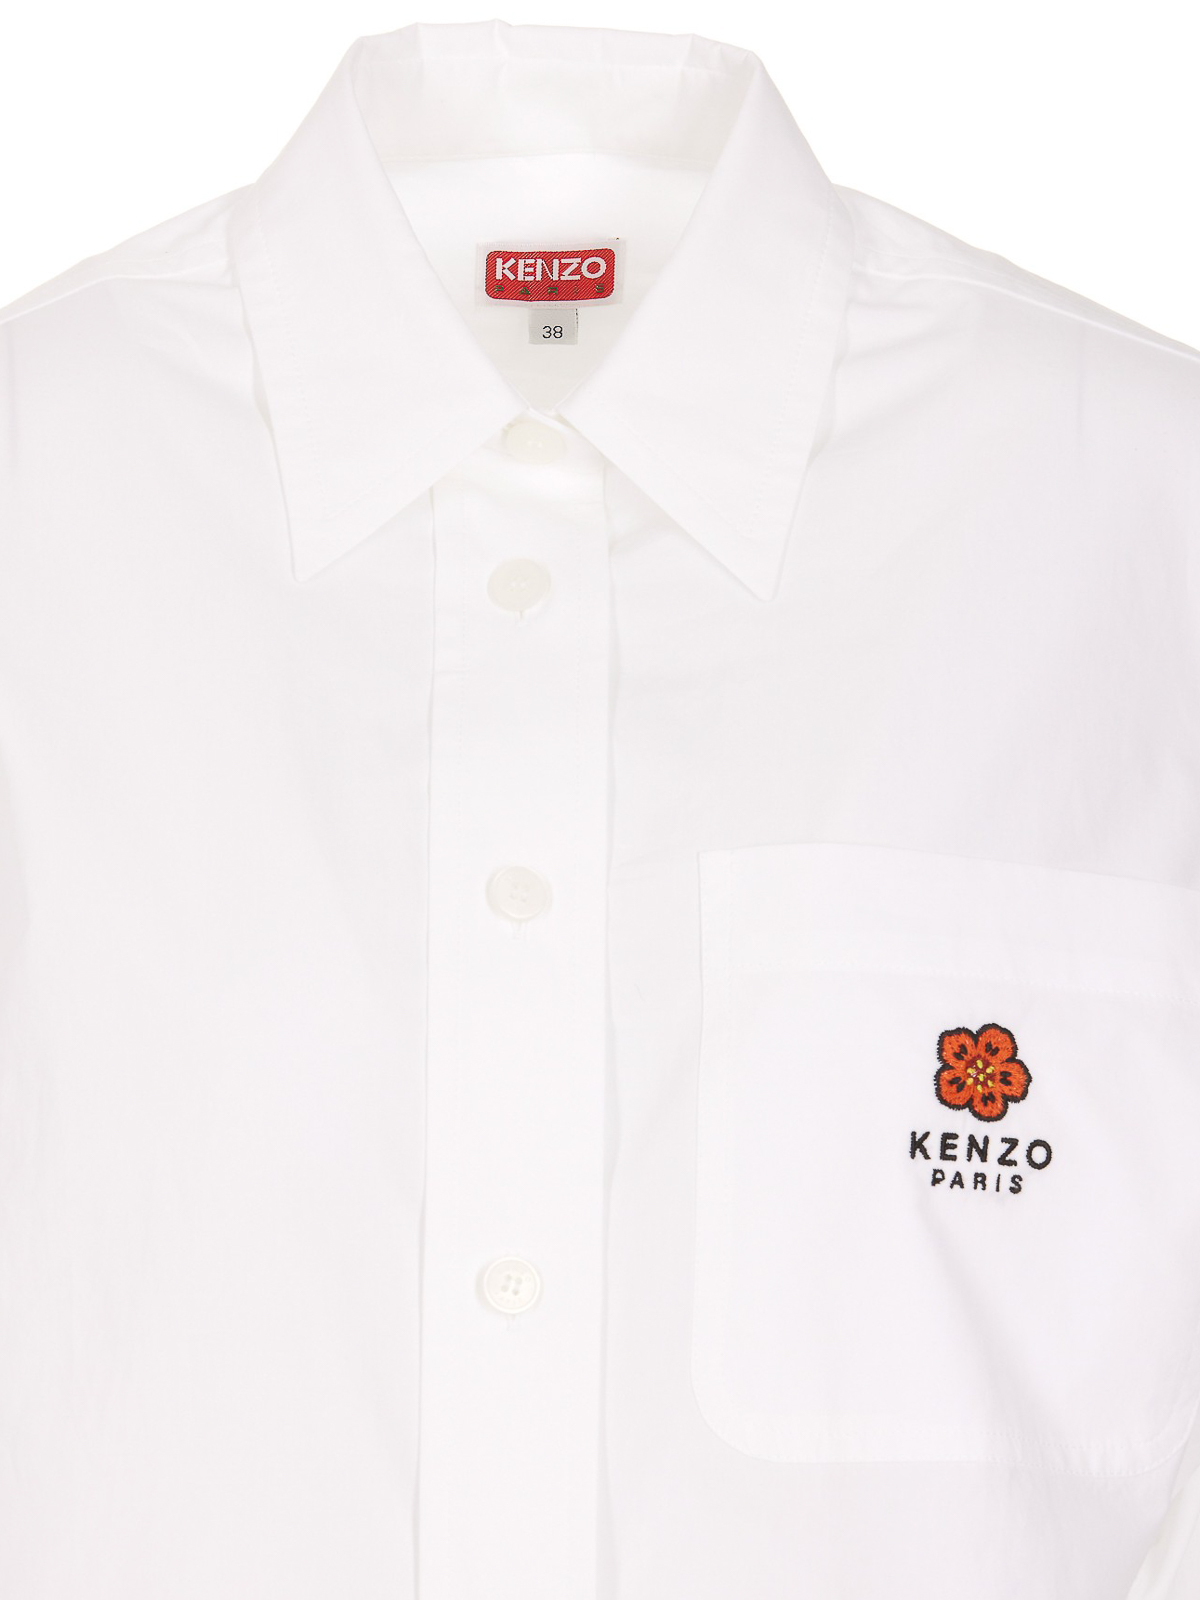 Shirts Kenzo - White shirt - FC62CH0619LH01 | Shop online at THEBS